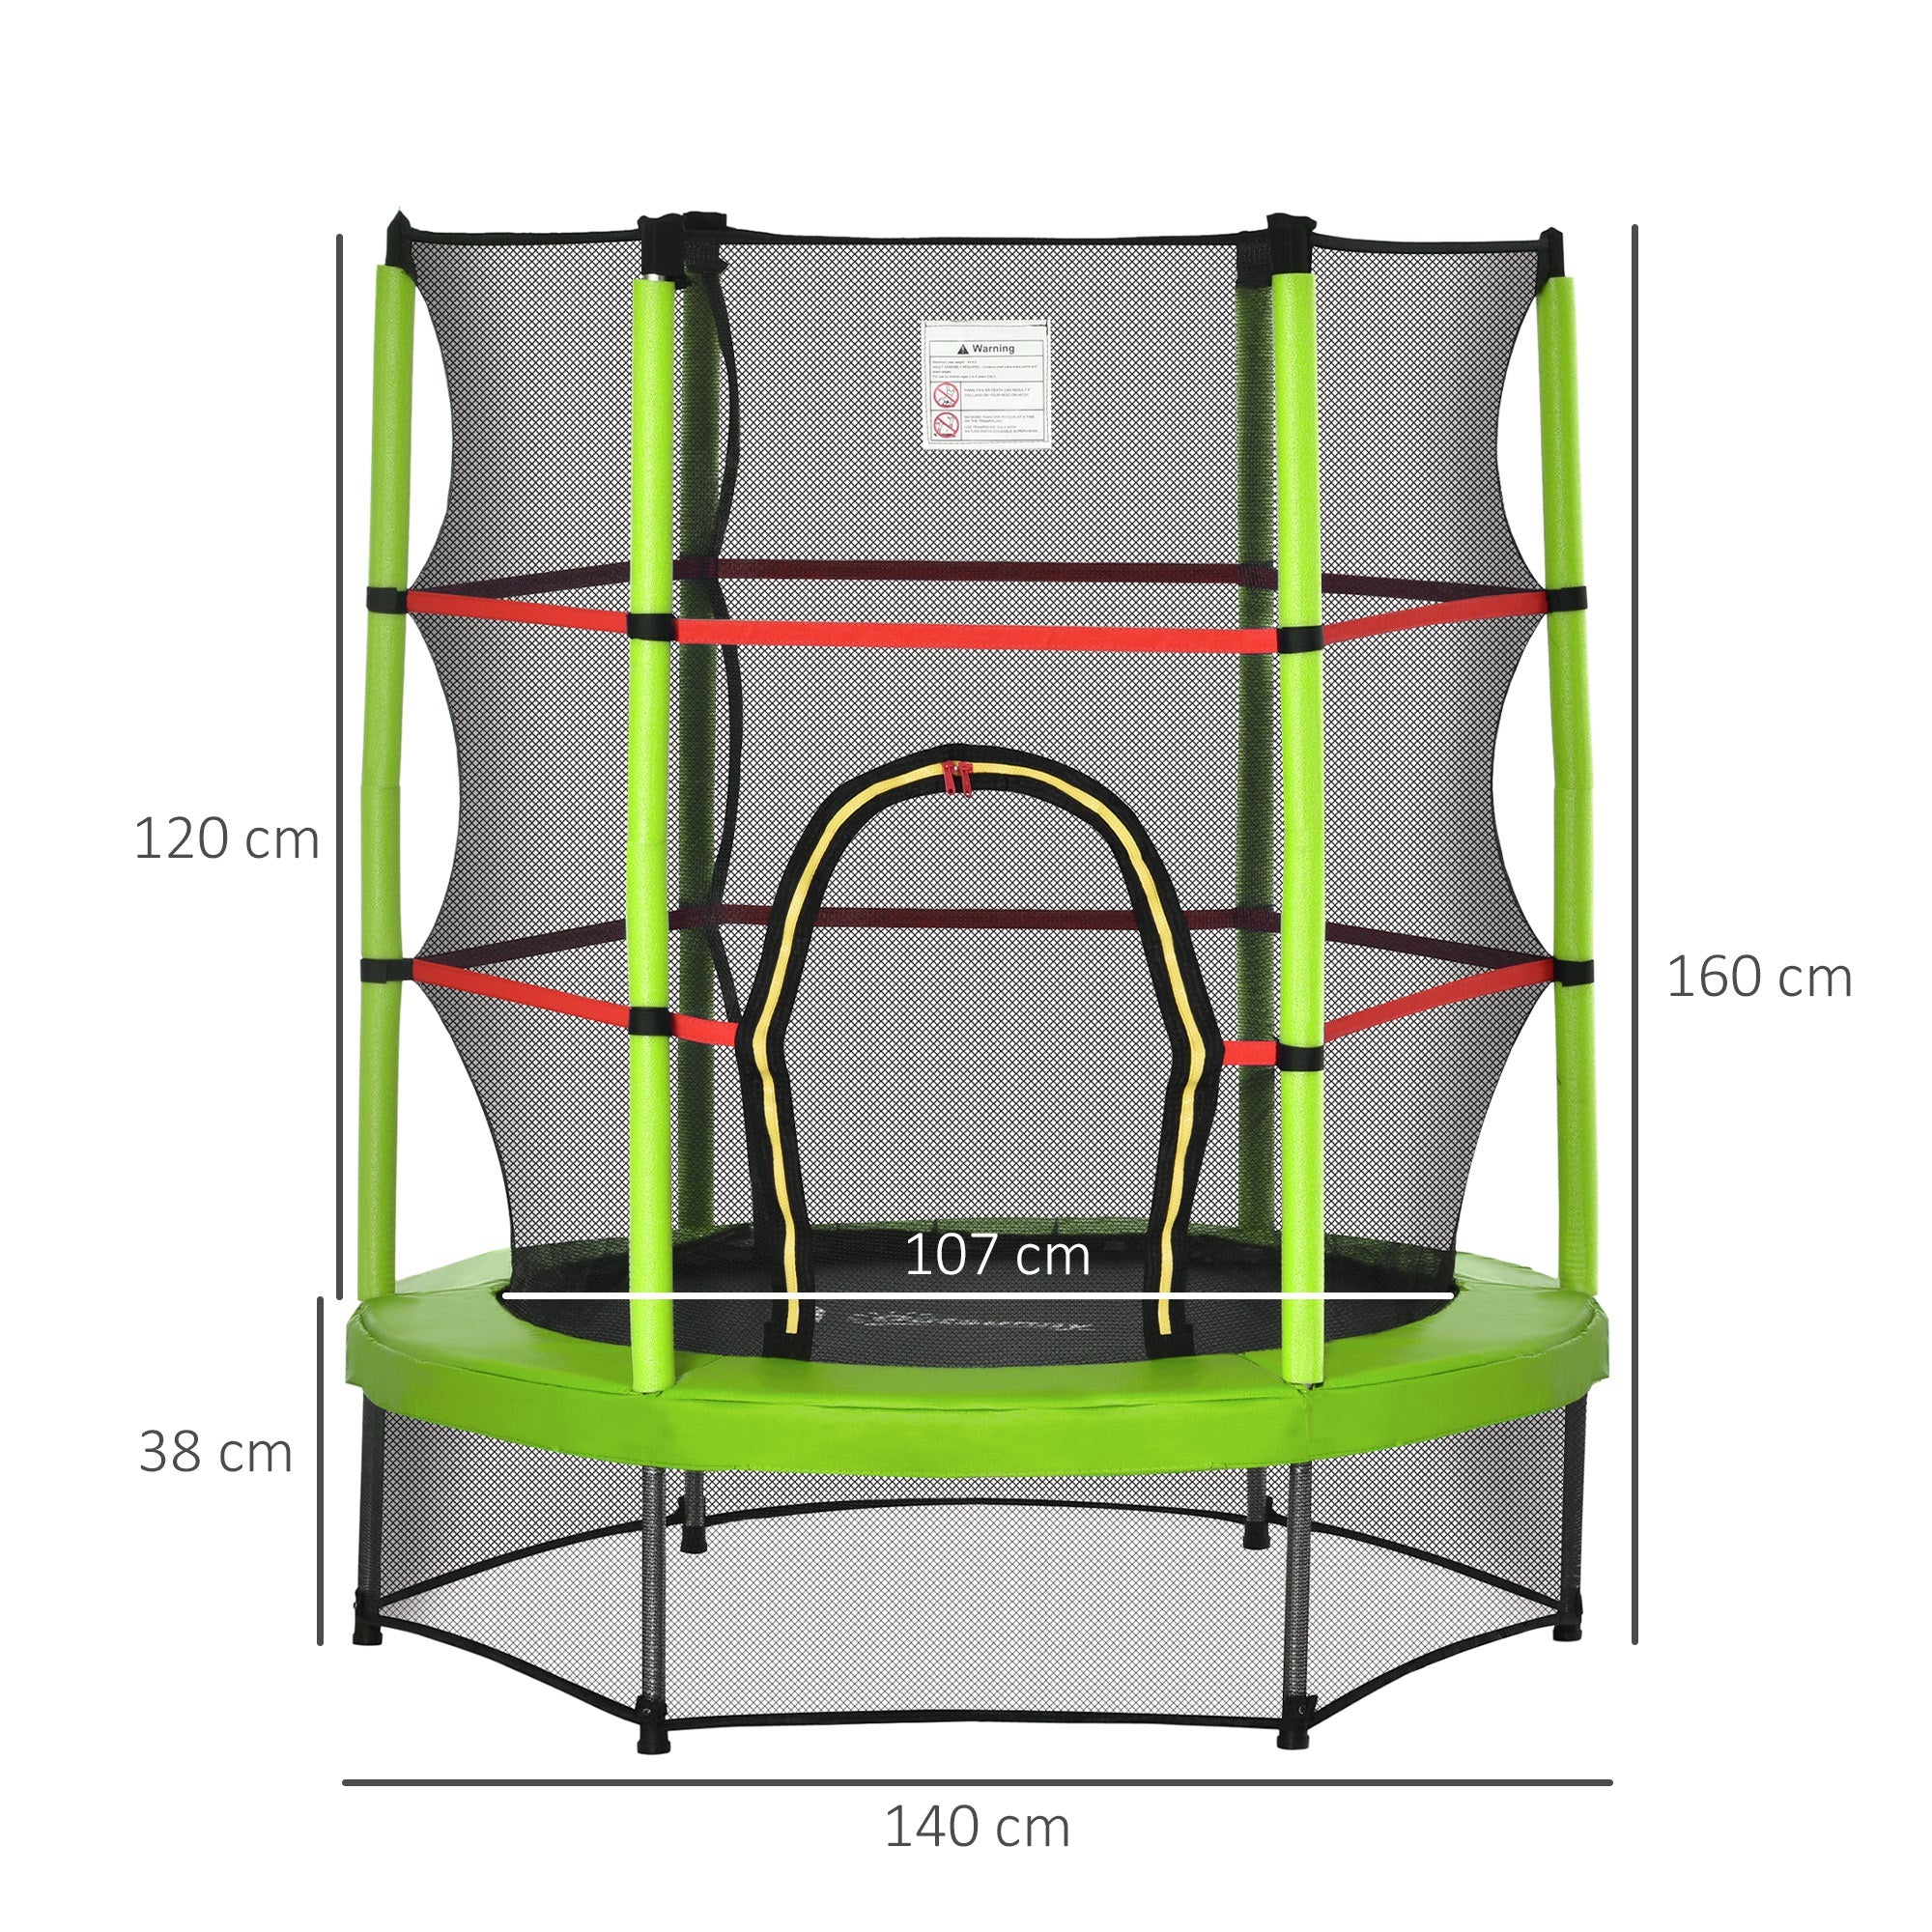 HOMCOM 5.2FT/63 Inch Kids Trampoline with Enclosure Net Steel Frame Indoor Round Bouncer Rebounder Age 3 to 6 Years Old Green